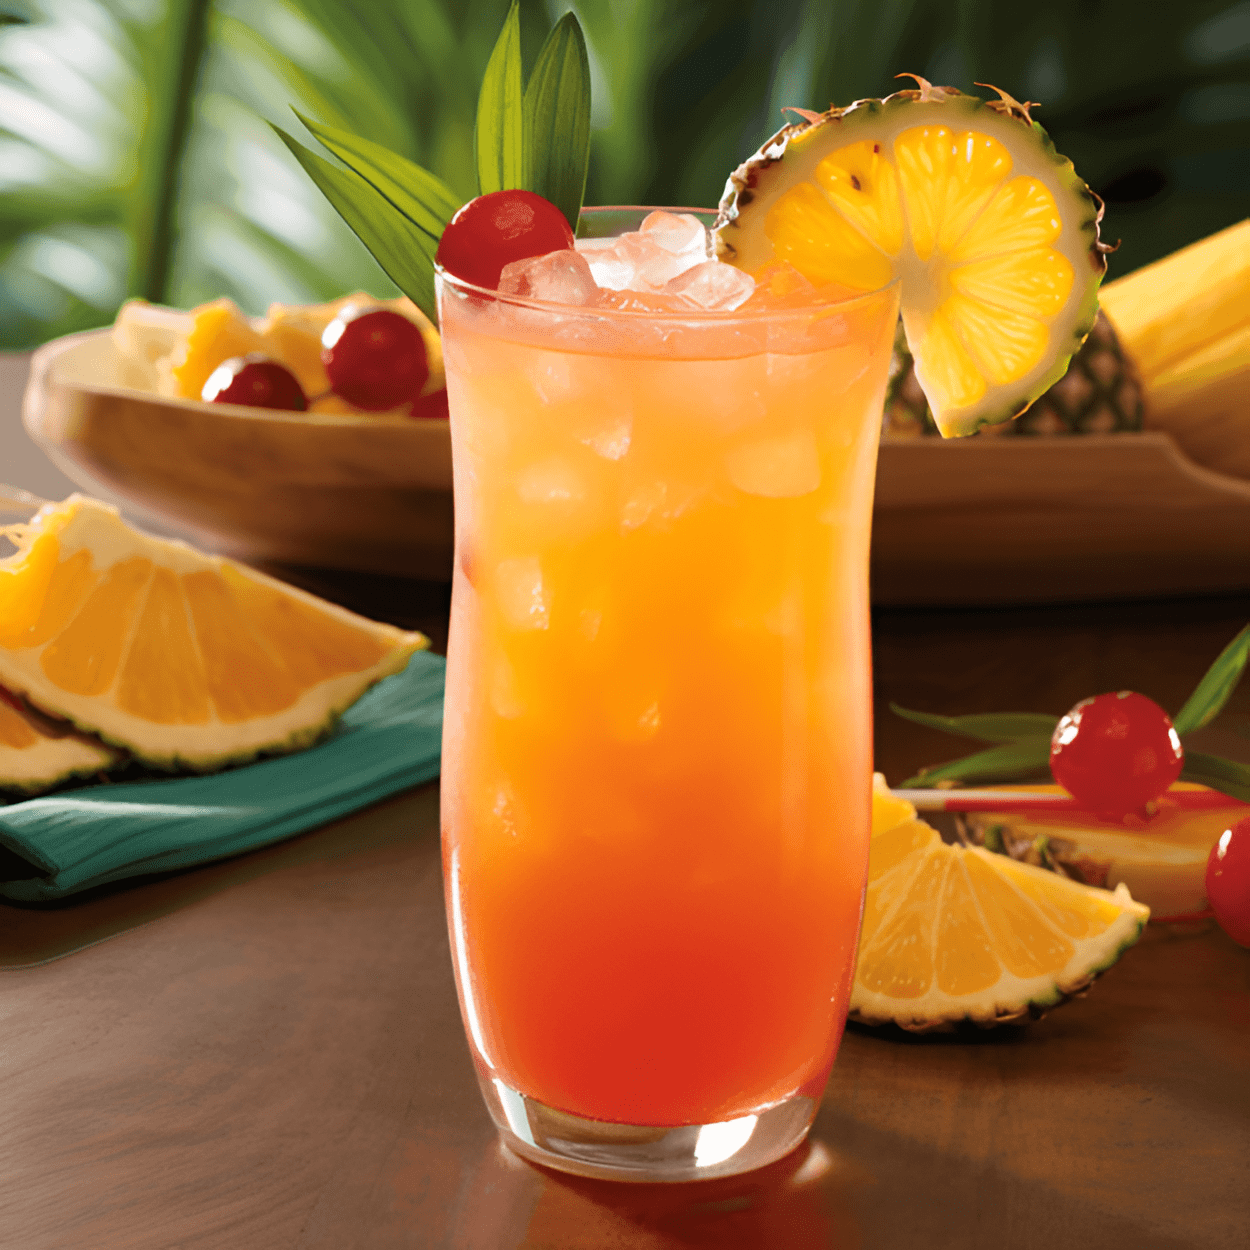 Haitian Fruit Punch Cocktail Recipe - The Haitian Fruit Punch is a sweet and tangy cocktail with a strong fruity flavor. The taste of the tropical fruits is prominent, with a hint of tartness from the lime. The rum adds a warm and smooth finish, making it a well-balanced and refreshing cocktail.